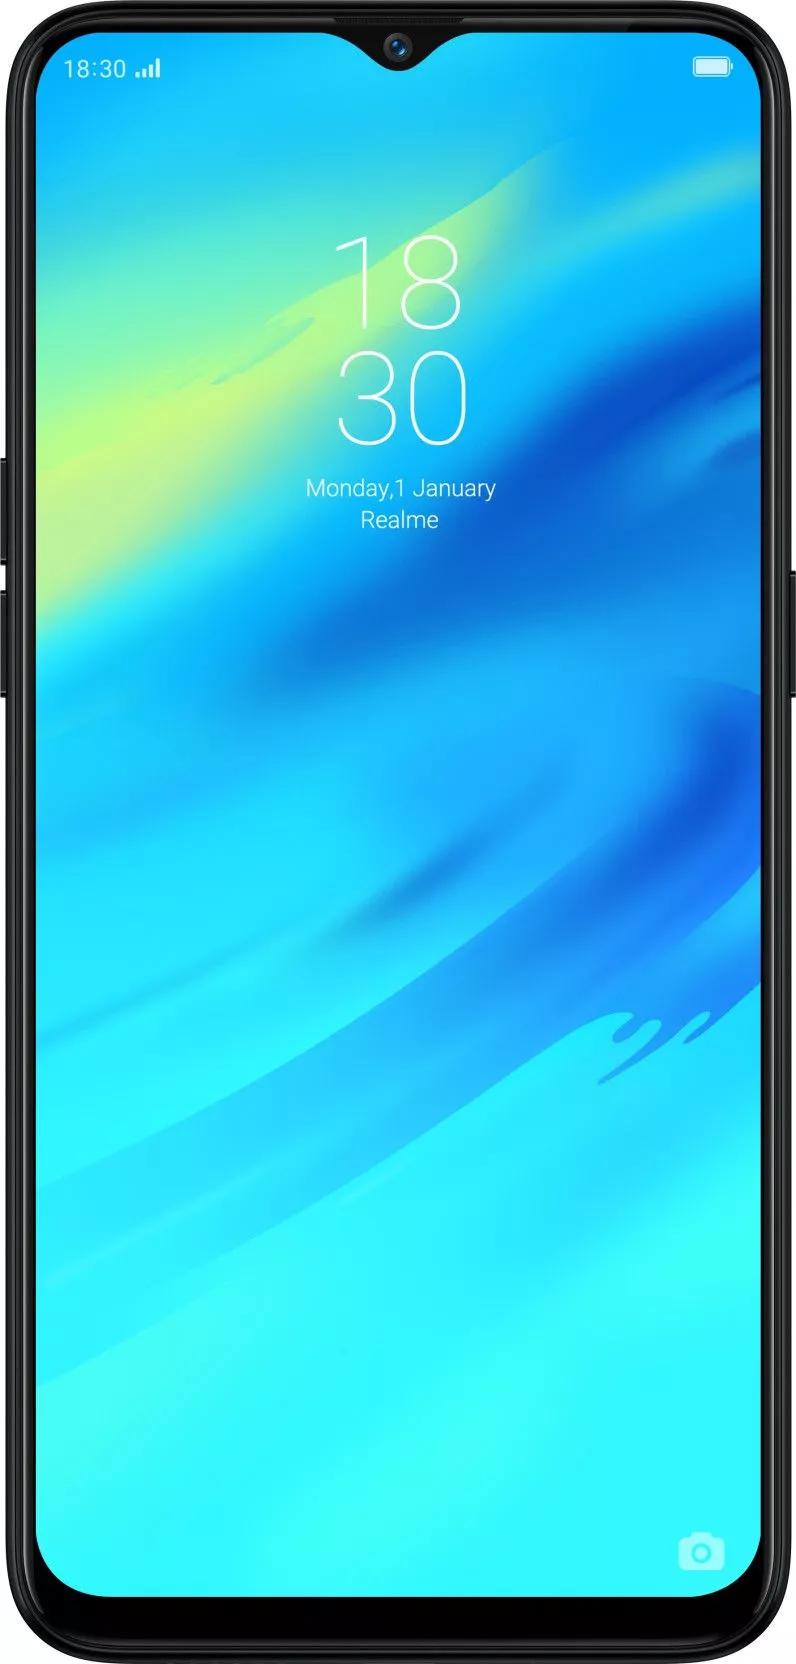 Realme Pro Photos Image And Wallpaper Mouthshut